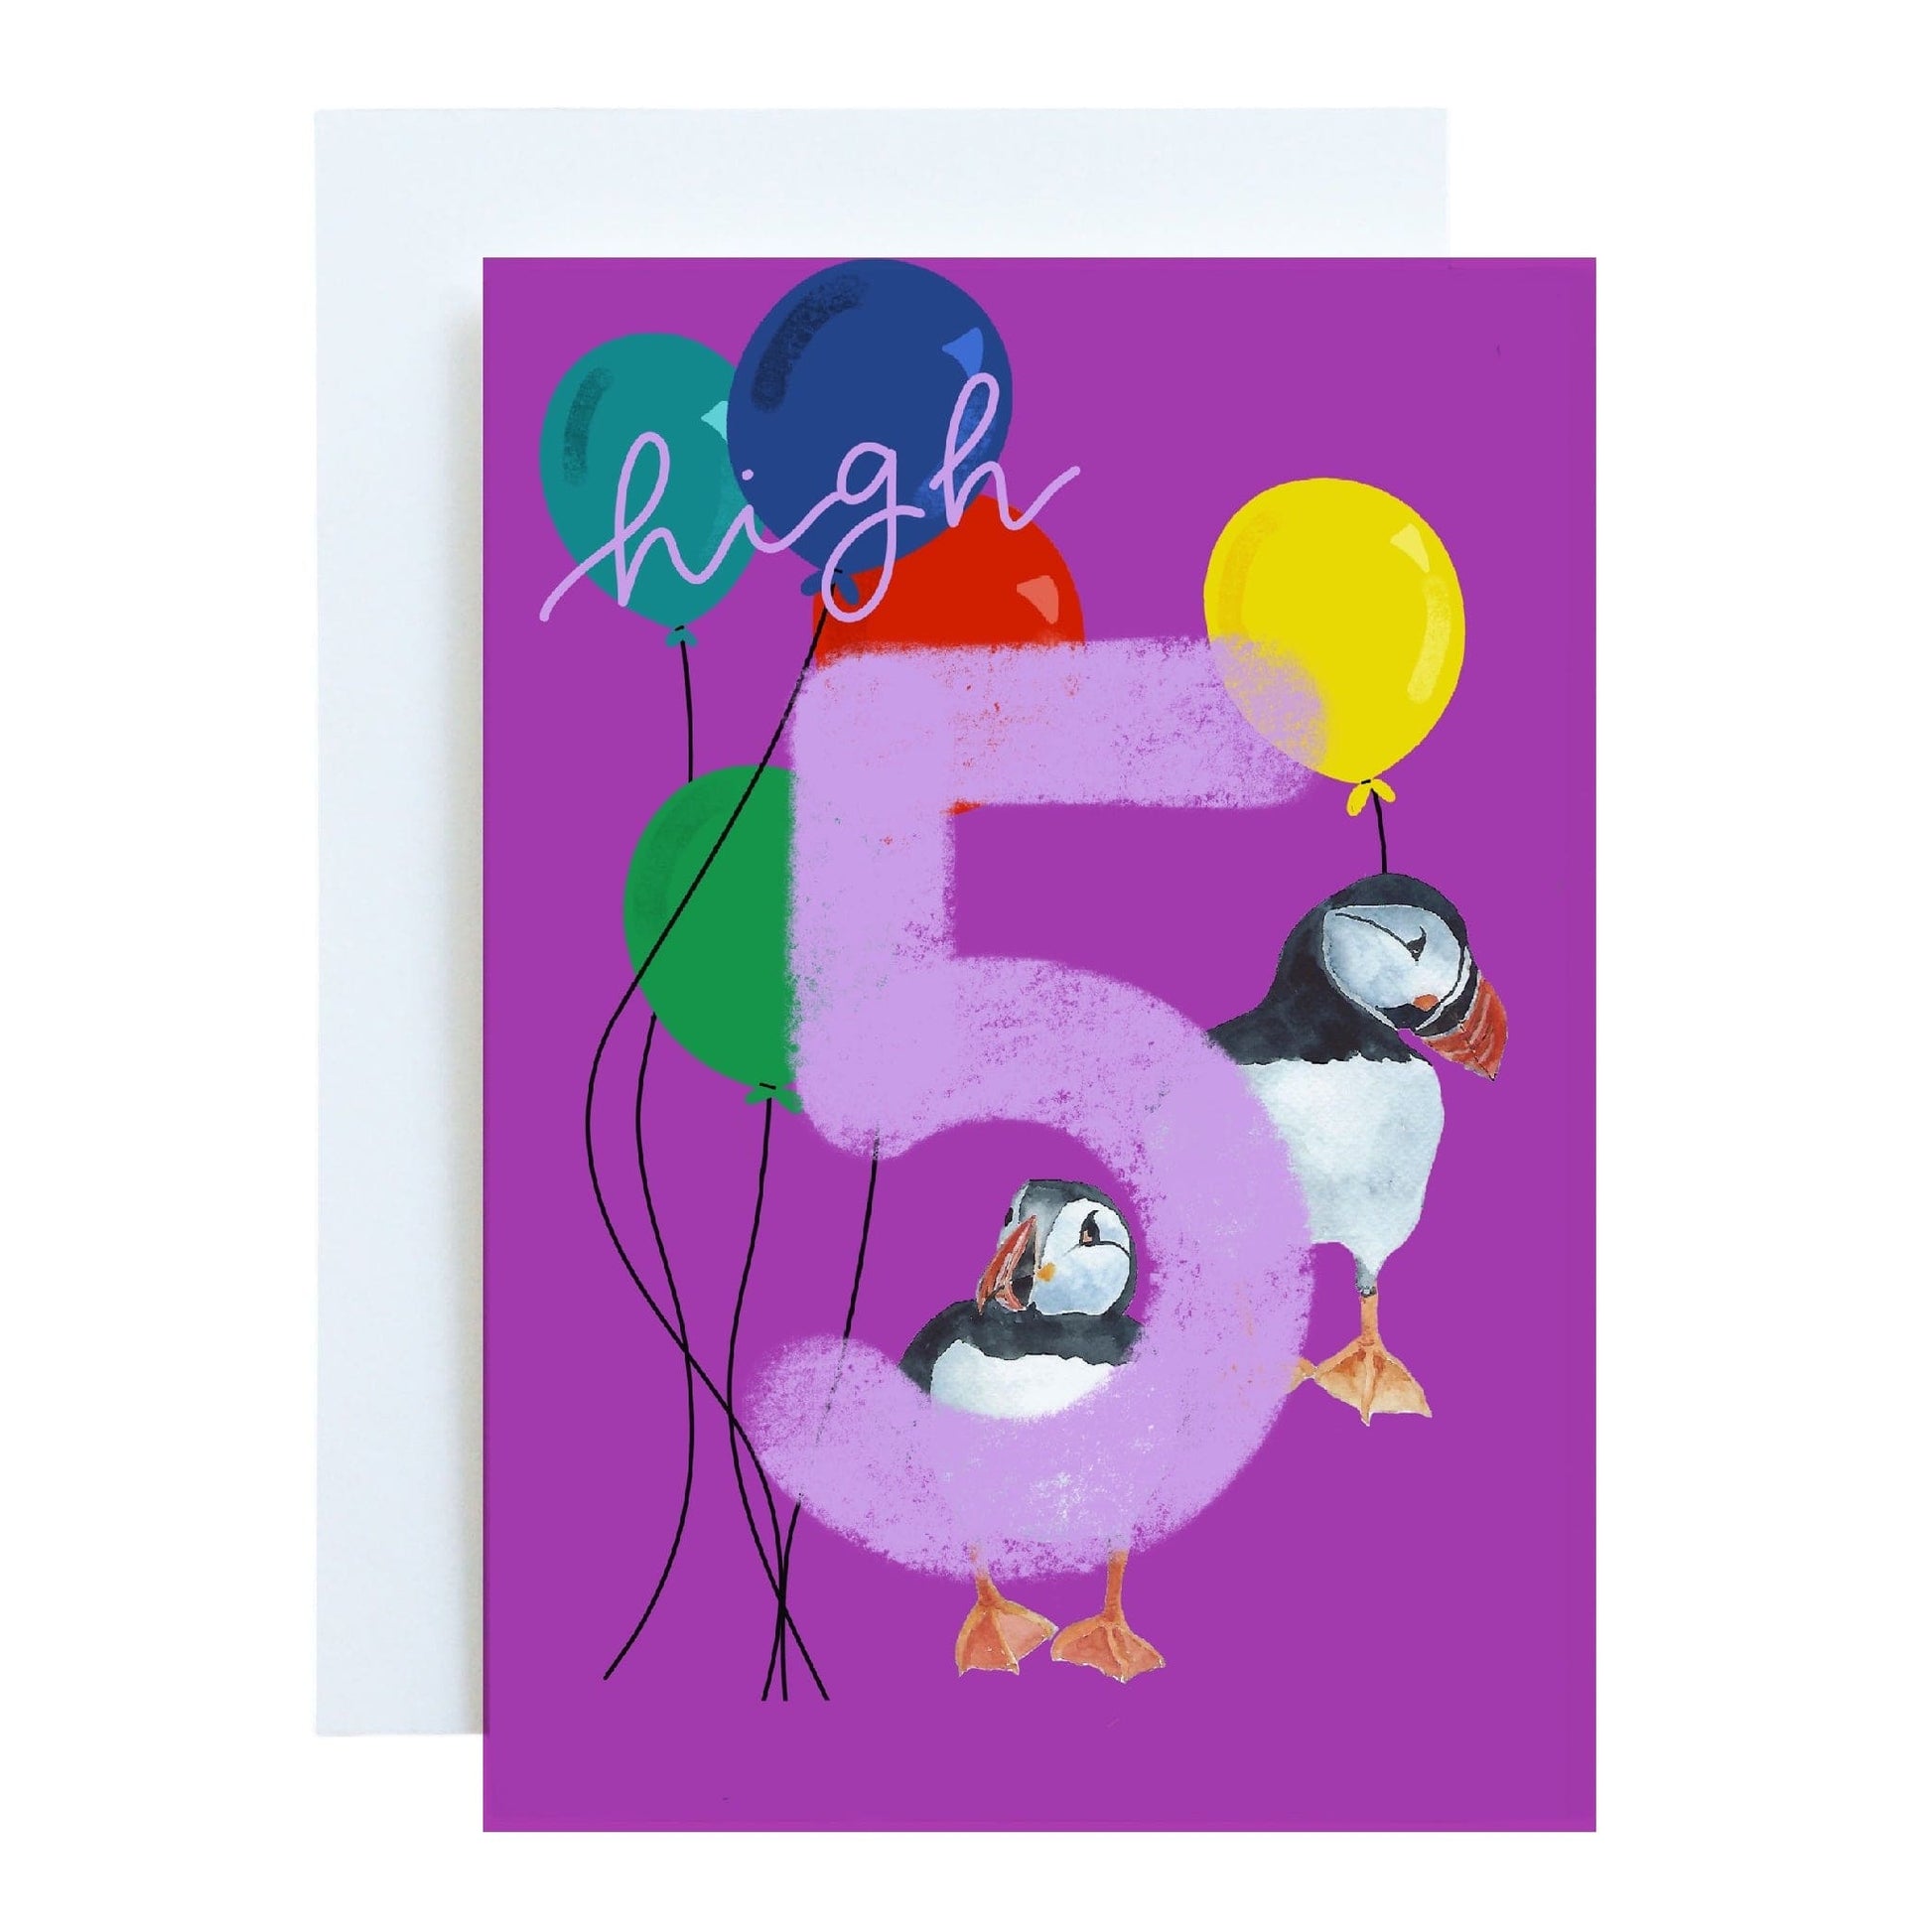 5 - Fifth birthday Card - Bright “high 5” with puffins Cards And Hope Designs   